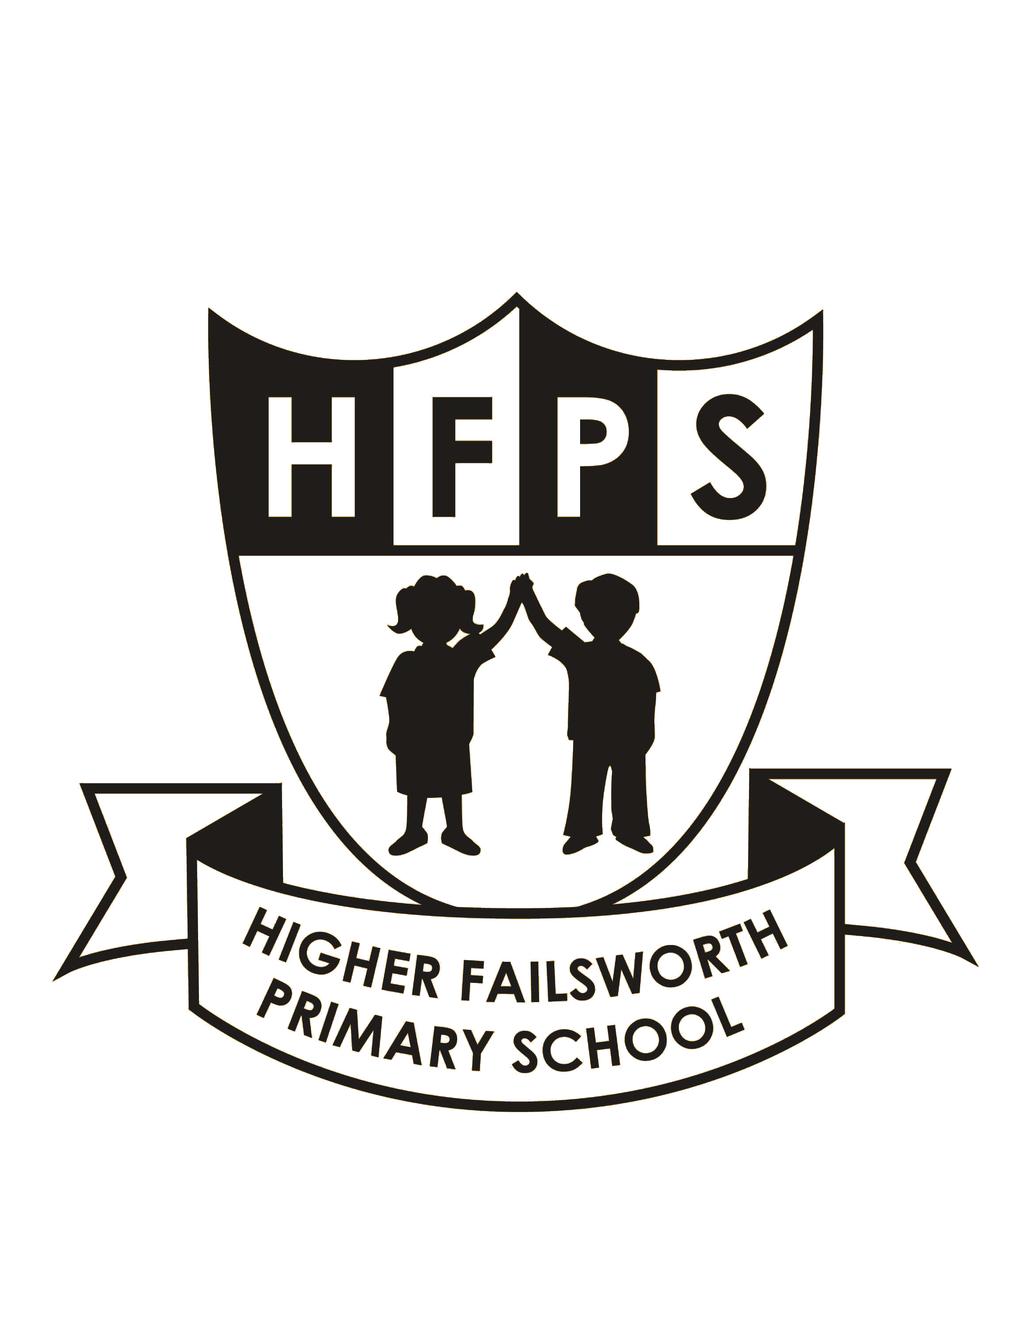 Higher Failsworth Primary School Equalities Policy and Accessibility Plan Working together for an Education for